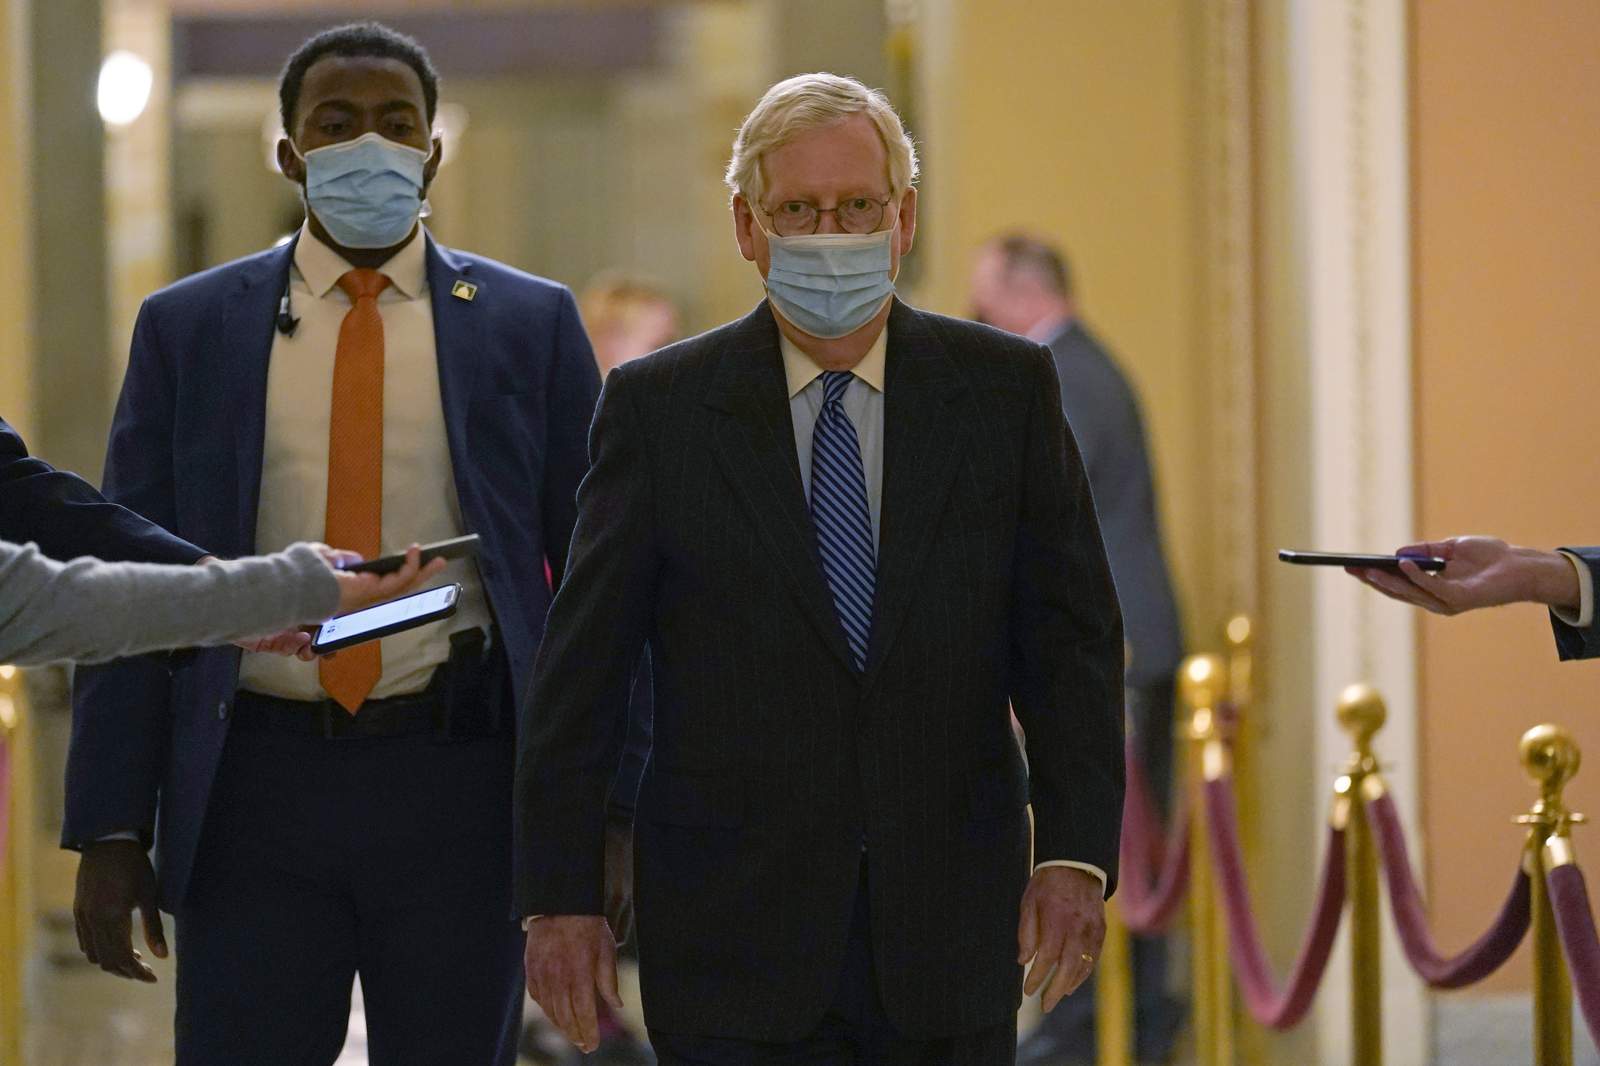 Congress averts shutdown; fight continues over pandemic aid